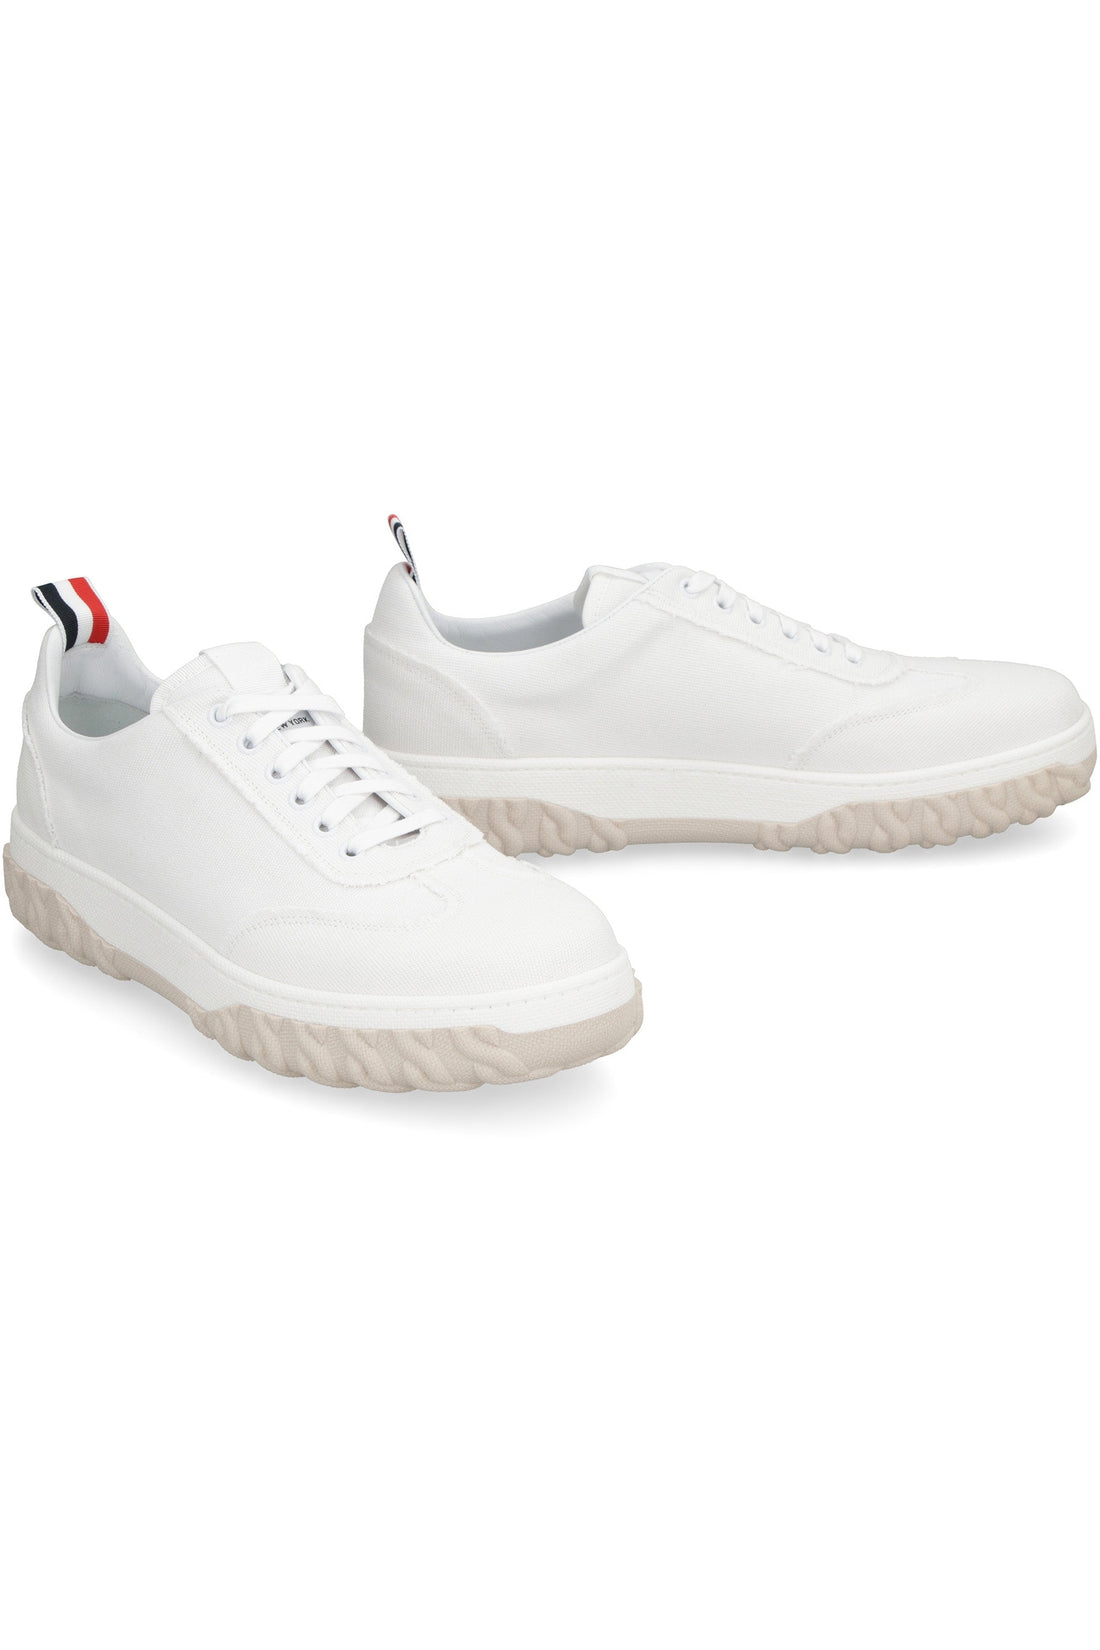 Thom Browne-OUTLET-SALE-Field canvas sneakers-ARCHIVIST